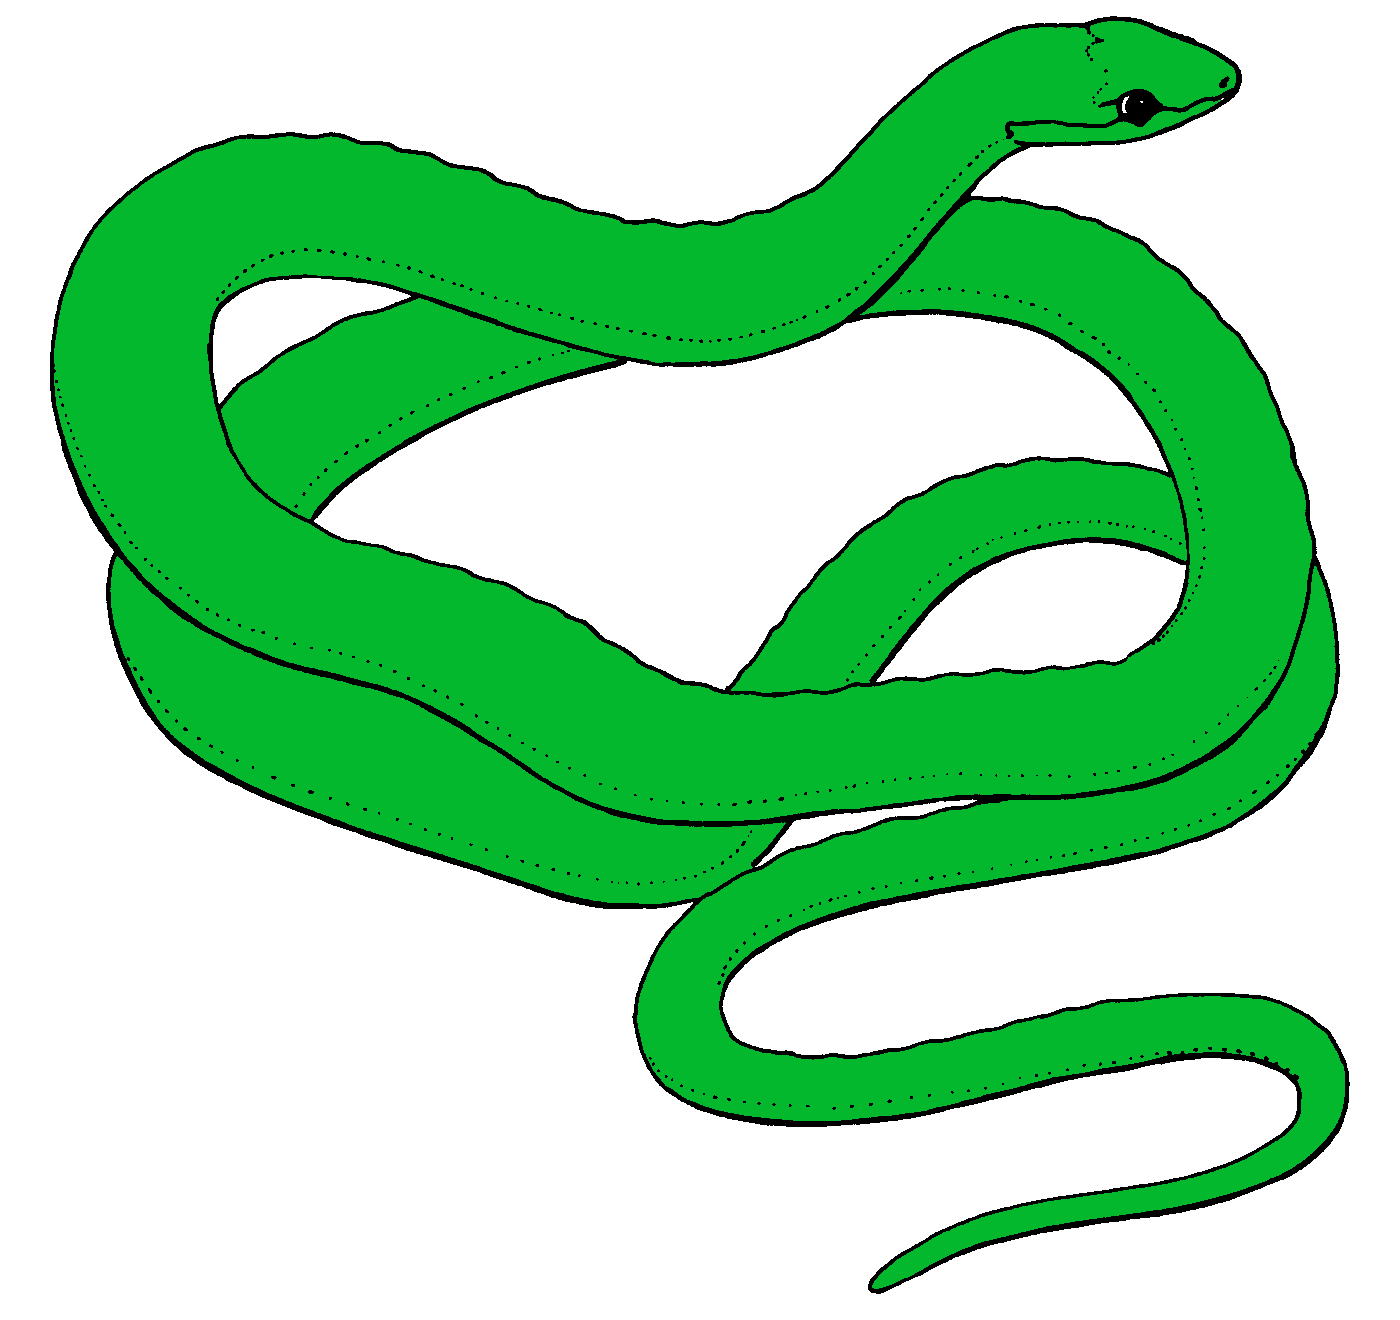 Animated Gifs Of Snake - ClipArt Best